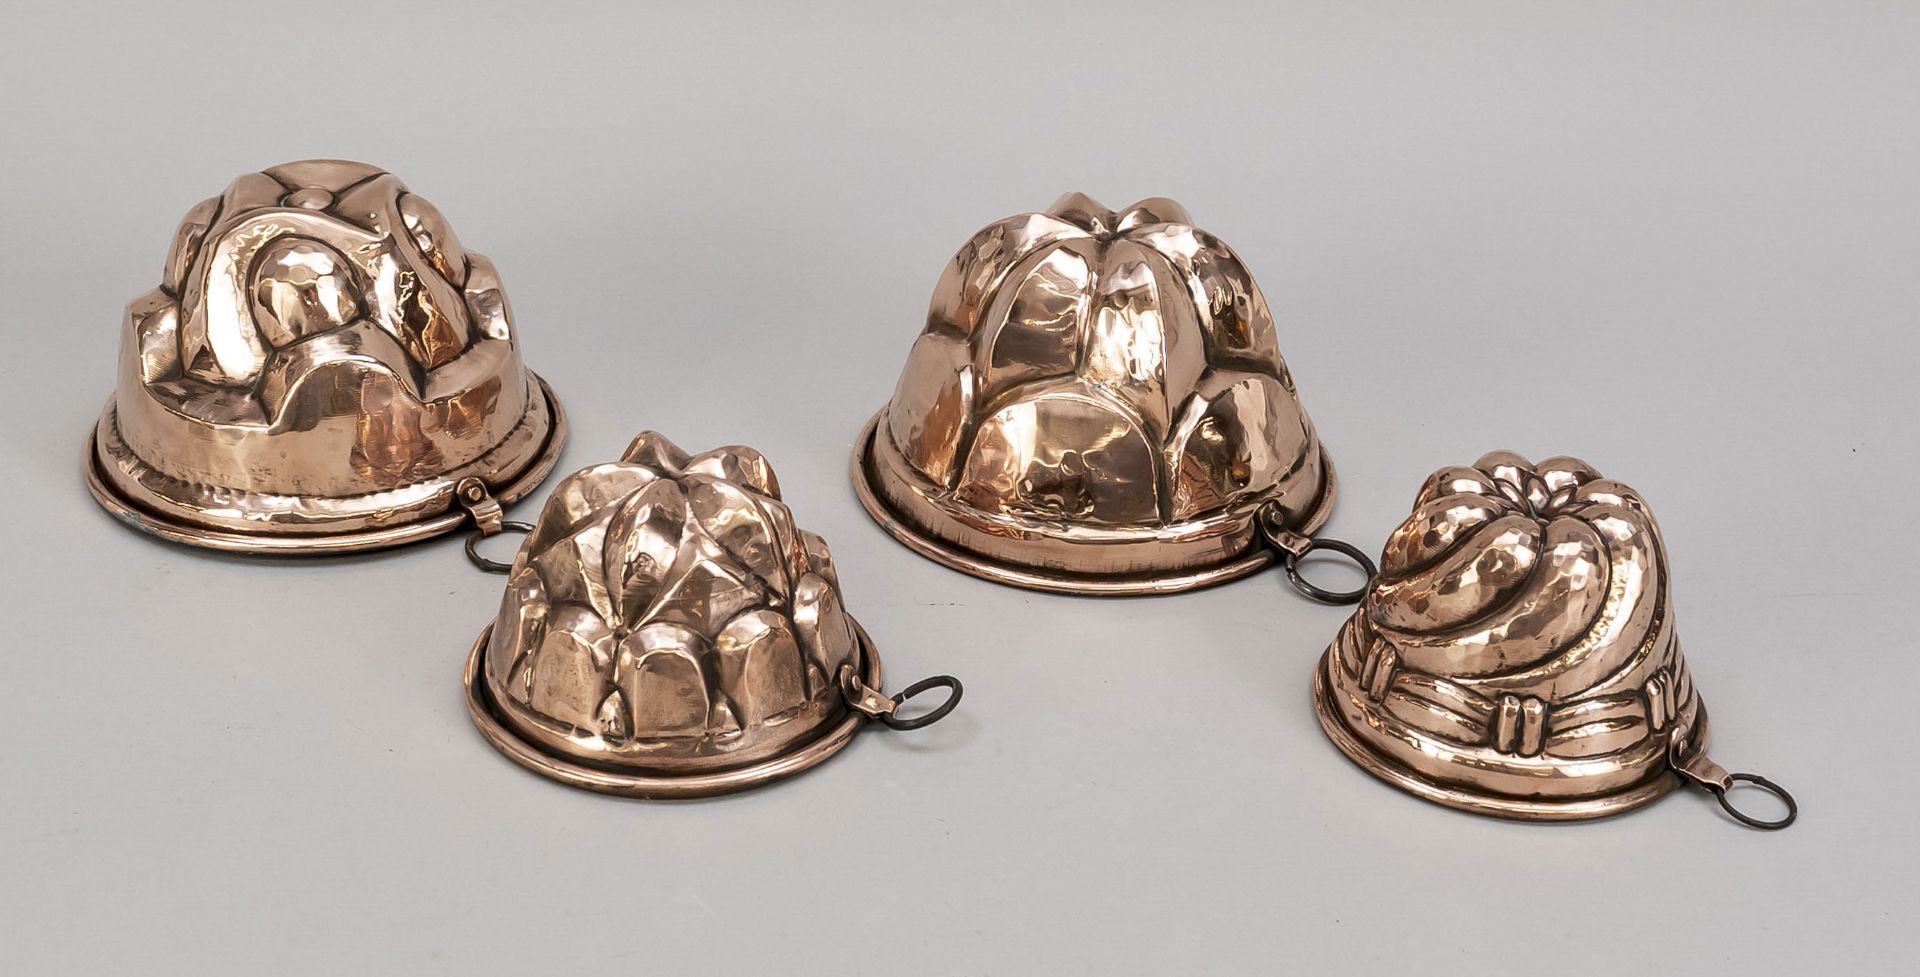 4 Gugelhupf baking dishes, 19th c., copper with residual tinning, d. to 16 cm